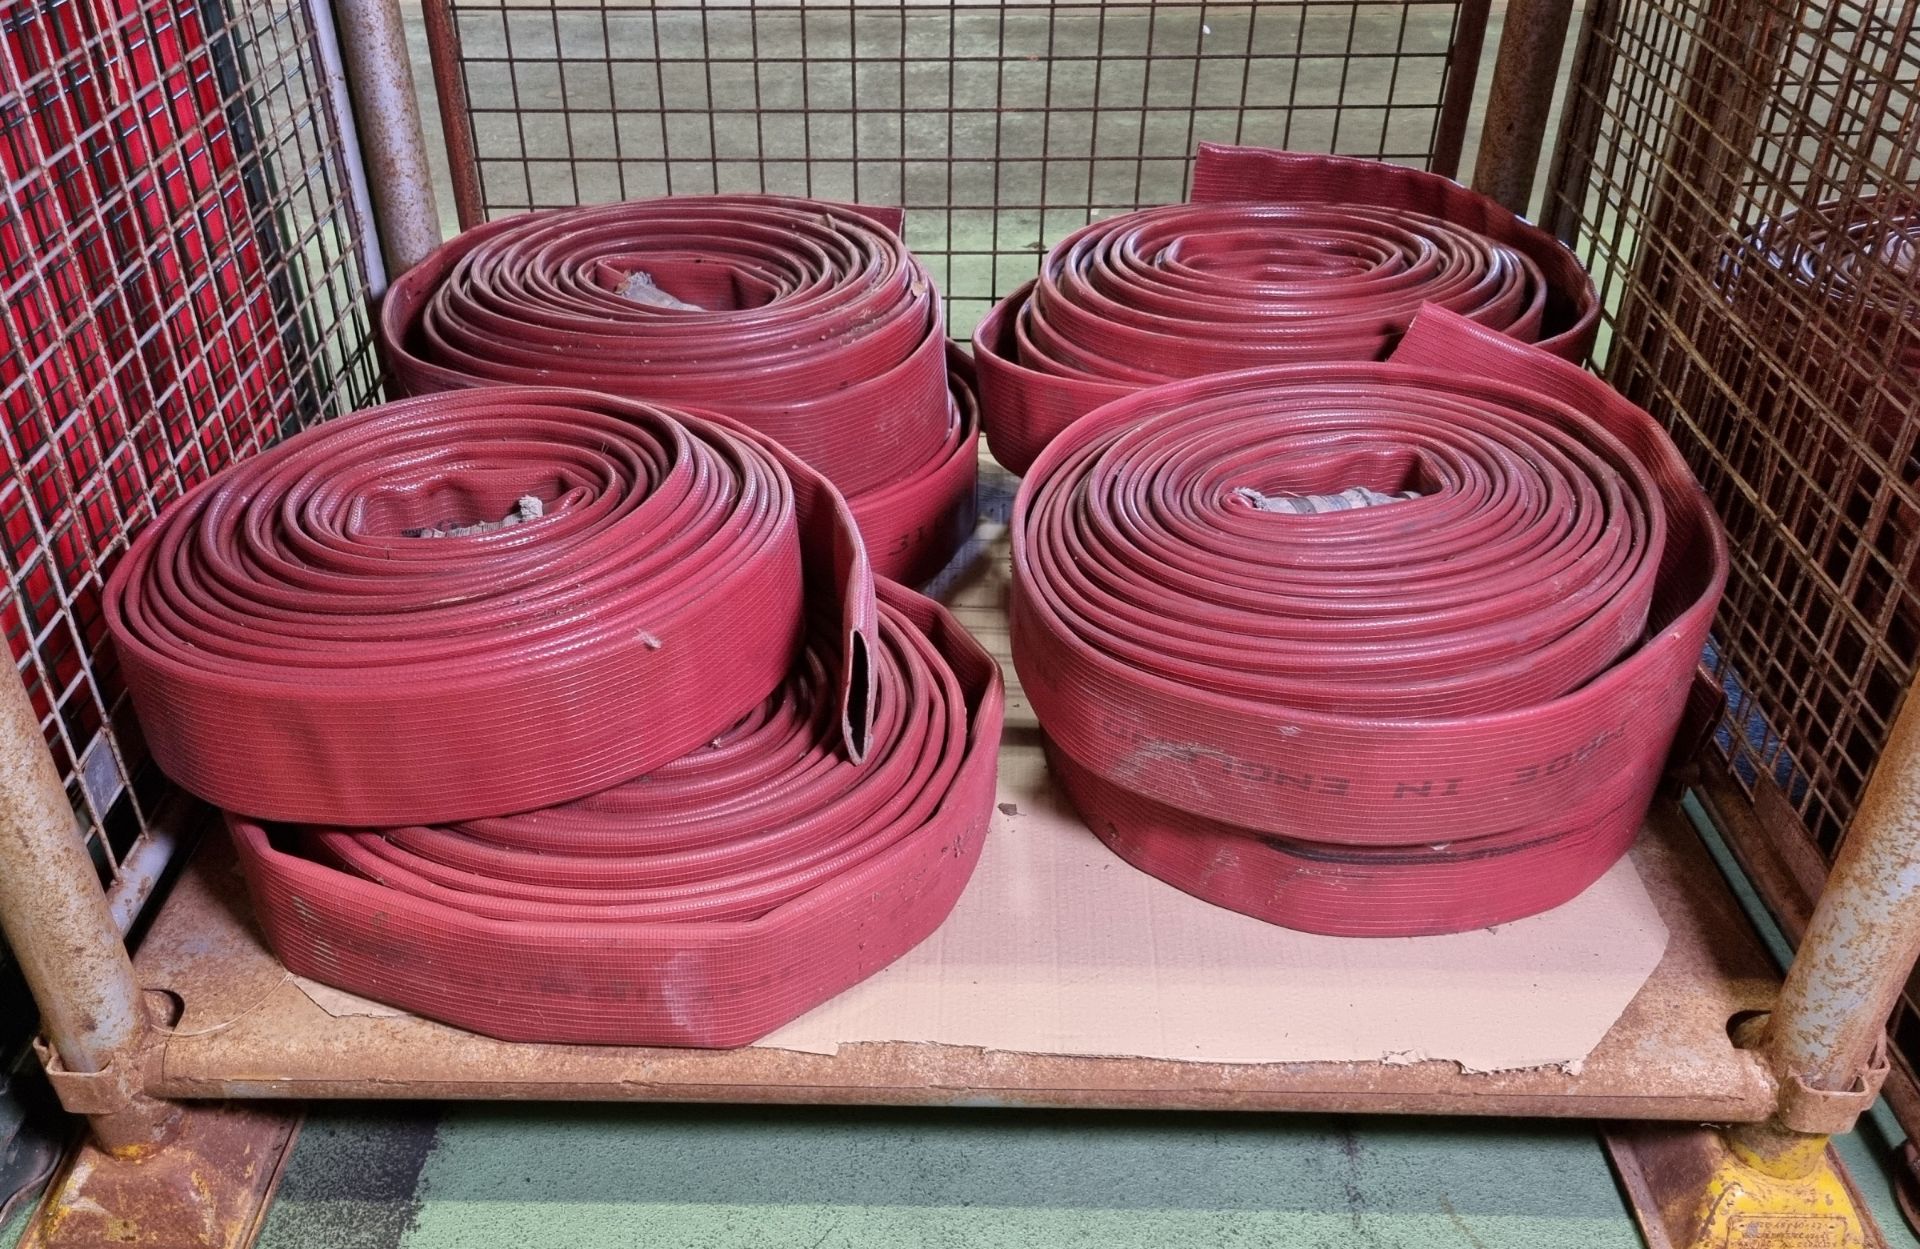 8x Angus Duraline 70mm lay flat hoses with single coupling - approx 20m in length